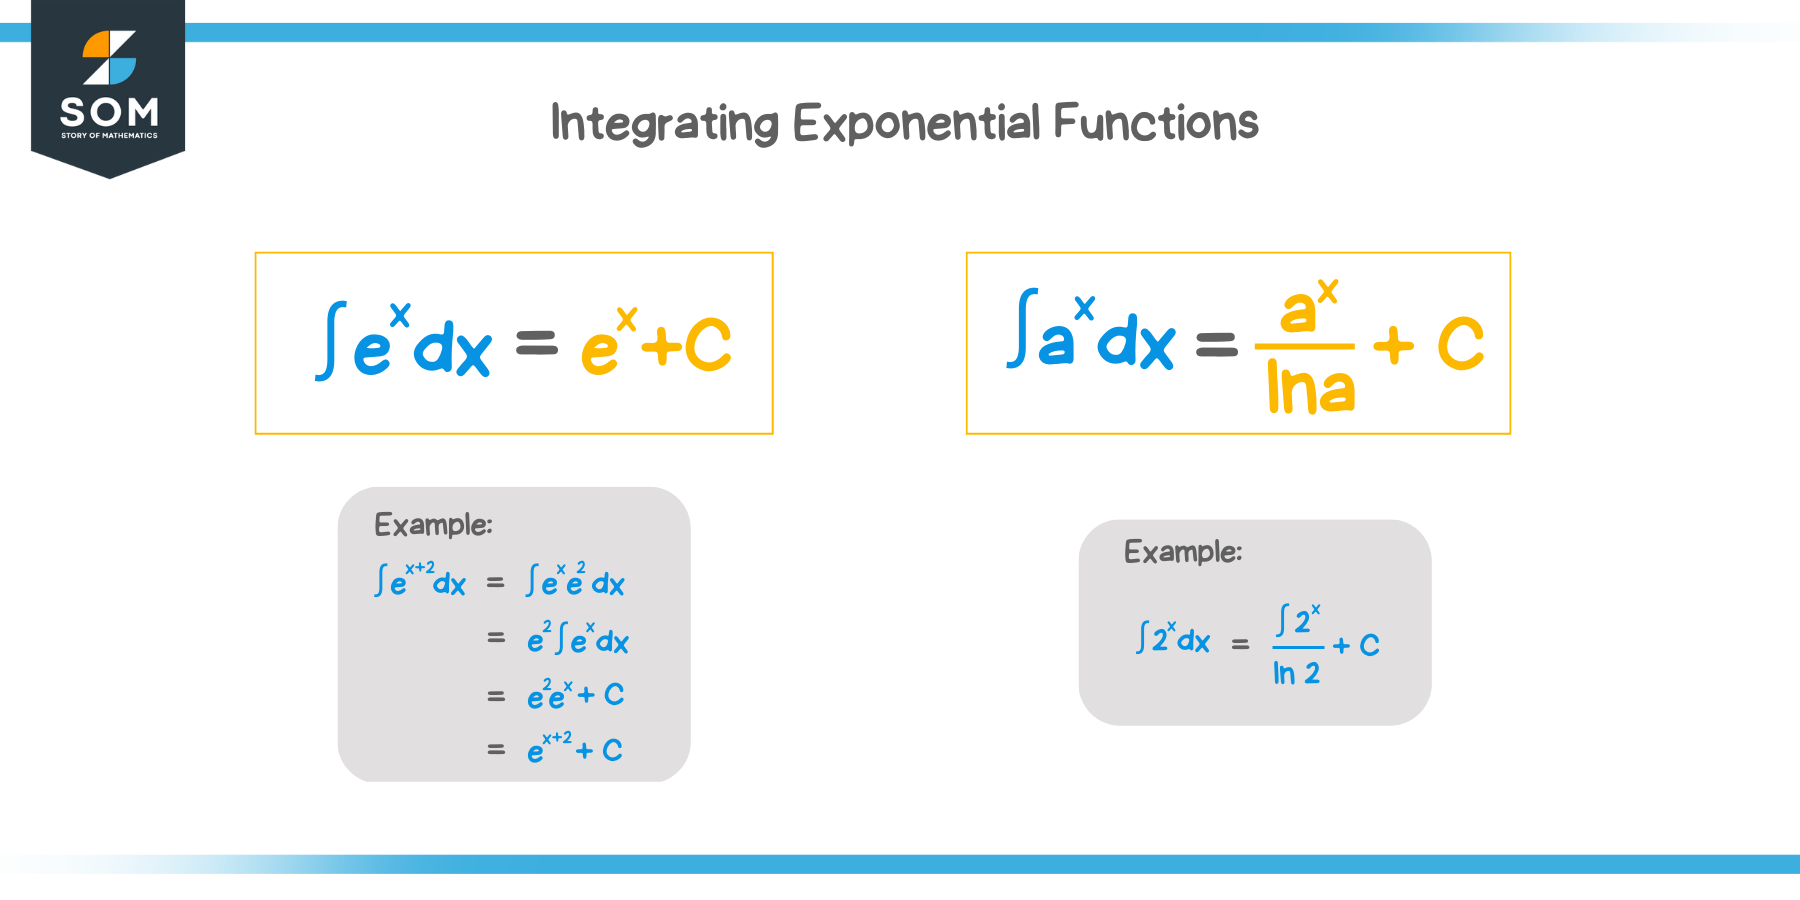 What is the integration of exponential function?